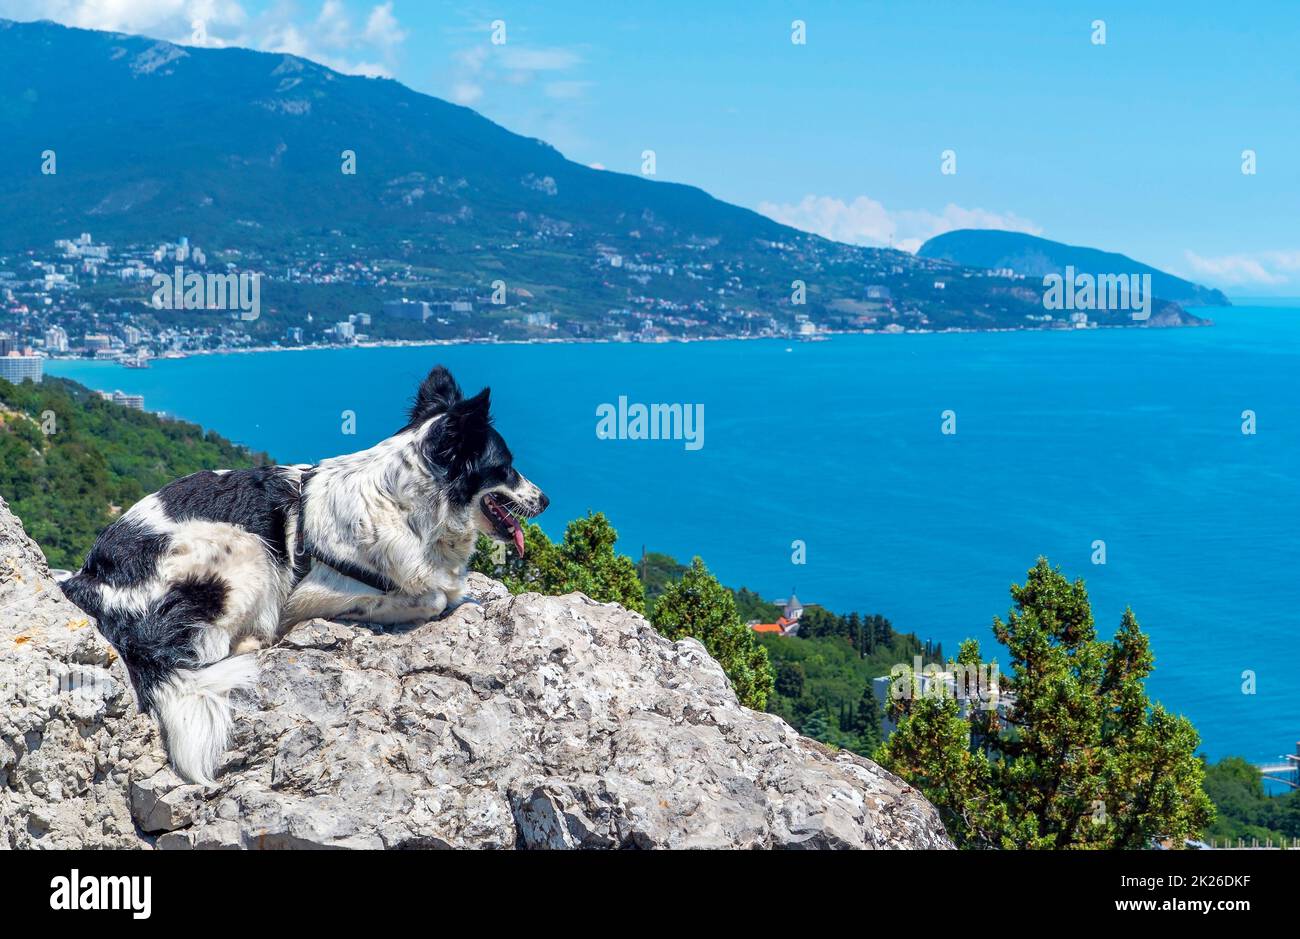 The dog is lying on a large stone against the background of the sea, peering into the distance. Stock Photo